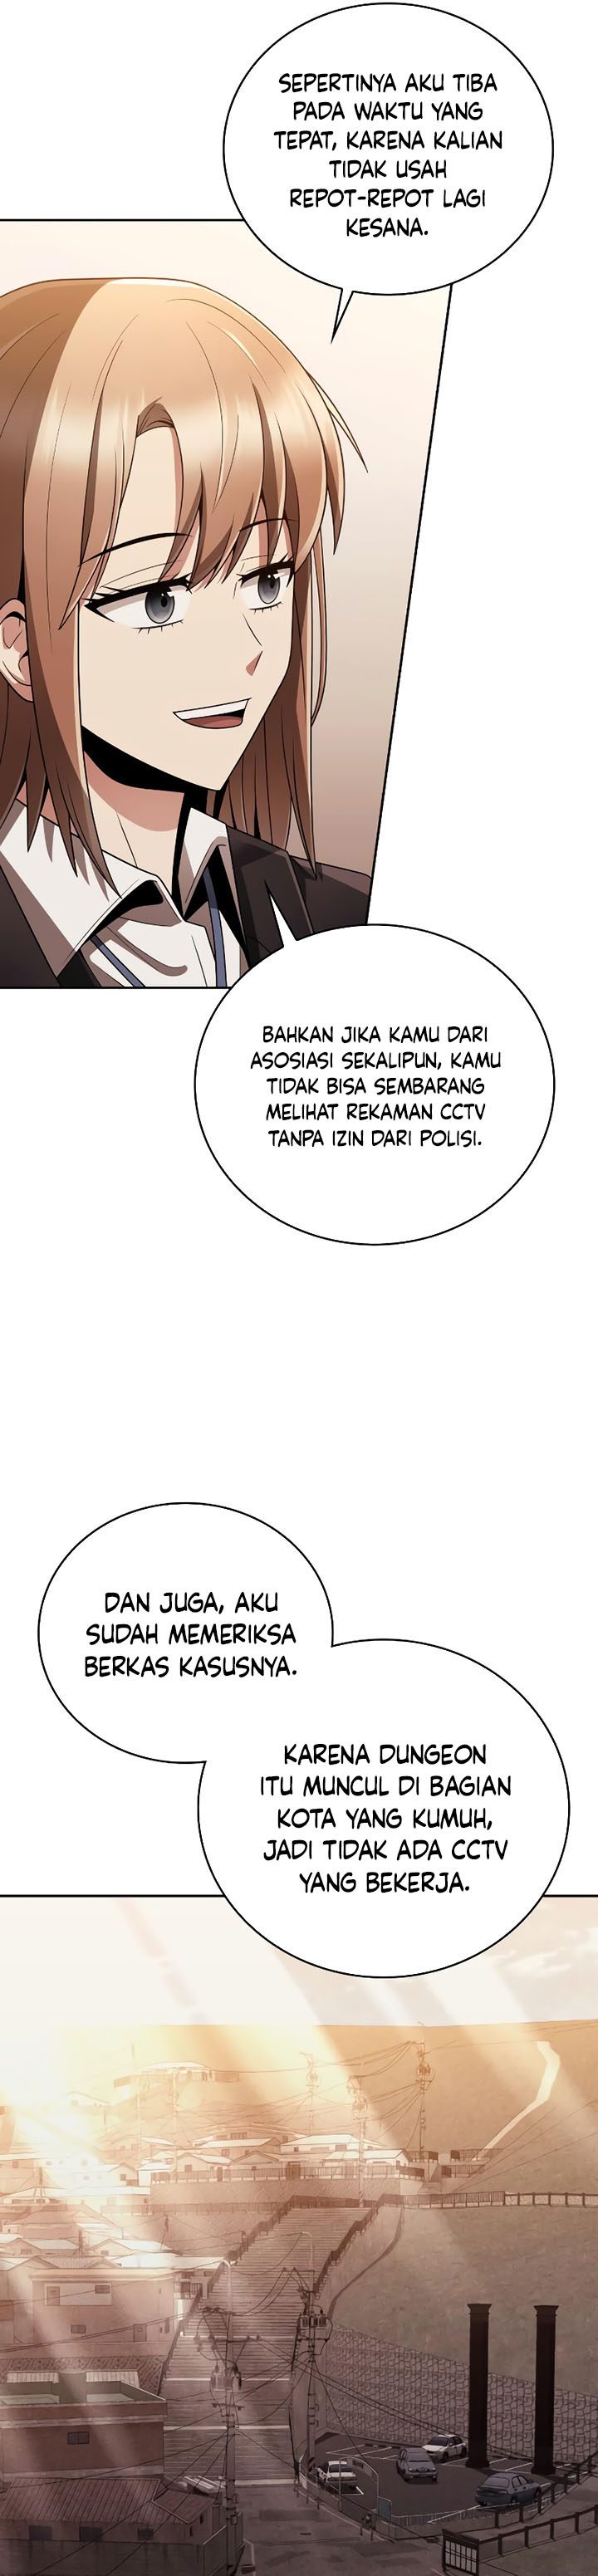 Dilarang COPAS - situs resmi www.mangacanblog.com - Komik clever cleaning life of the returned genius hunter 020 - chapter 20 21 Indonesia clever cleaning life of the returned genius hunter 020 - chapter 20 Terbaru 19|Baca Manga Komik Indonesia|Mangacan